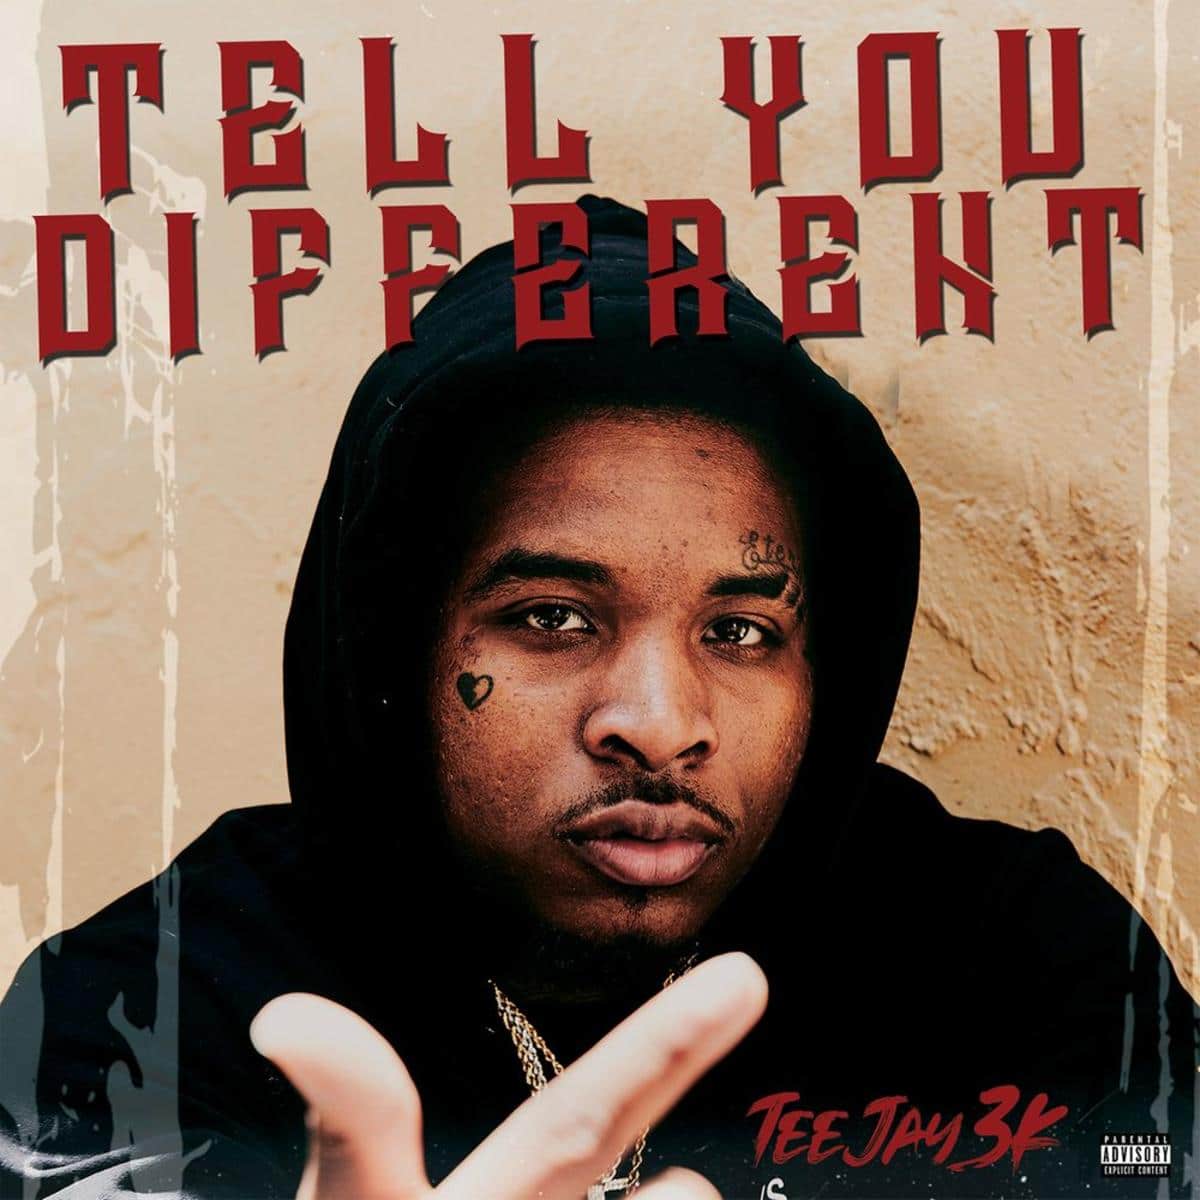 Teejay3k - Tell You Different